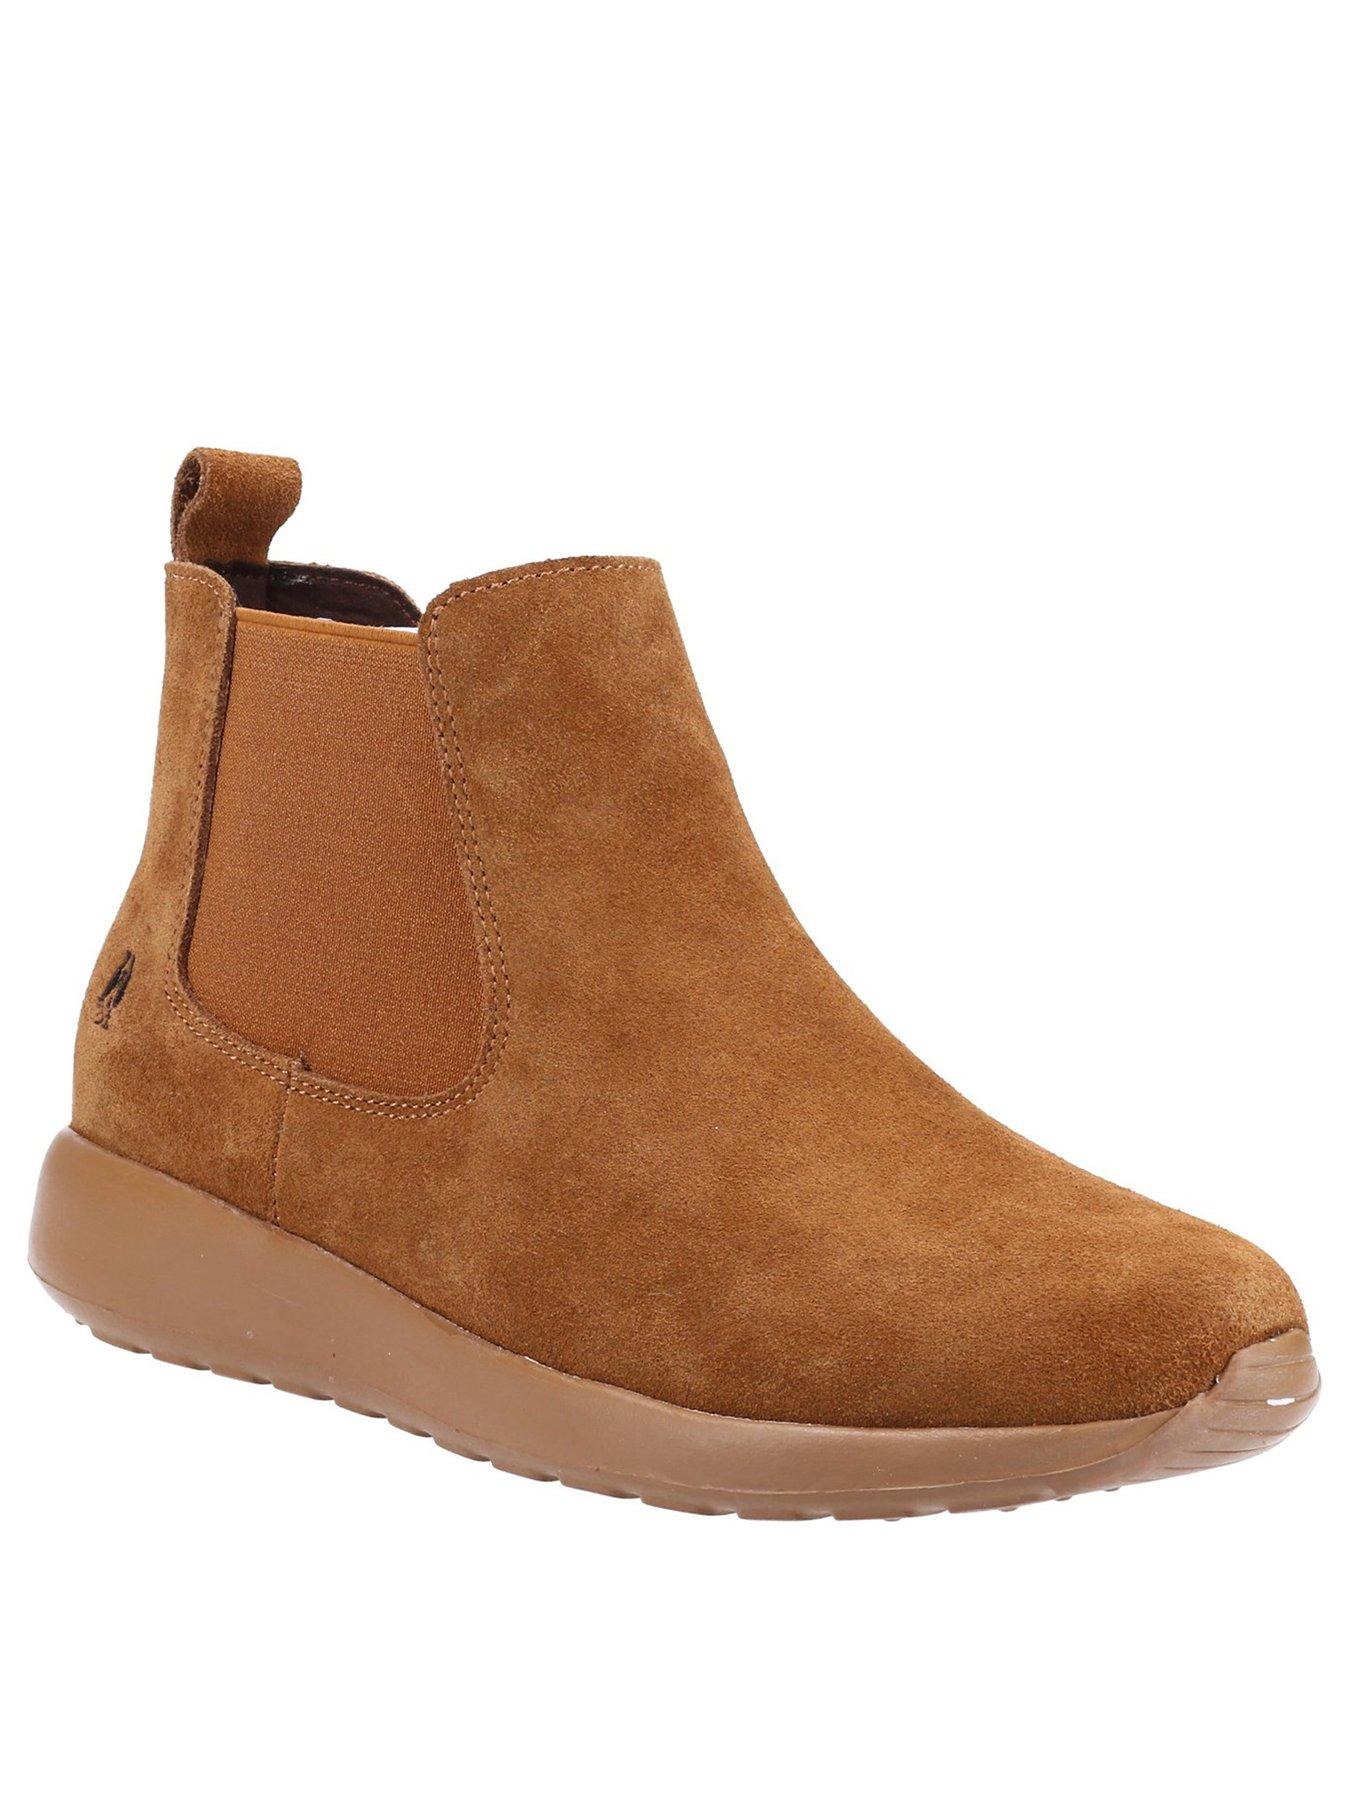 Shoes & boots Lana Ankle Boot - Tan